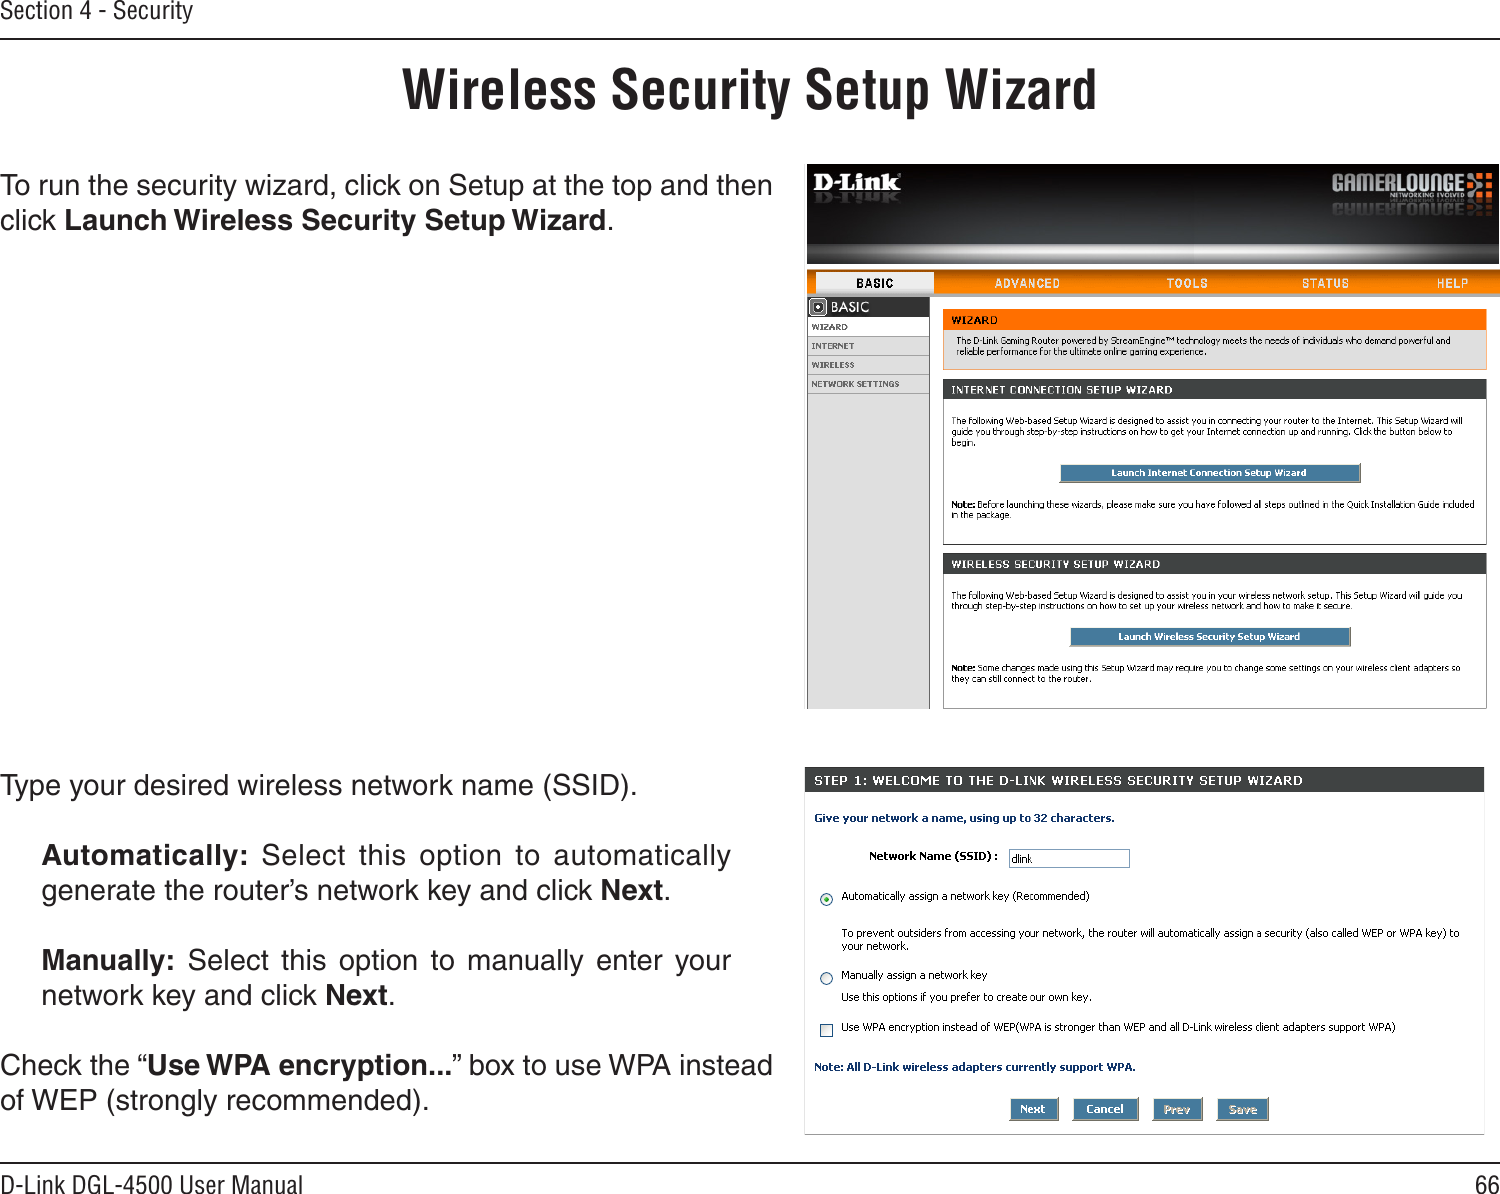 66D-Link DGL-4500 User ManualSection 4 - SecurityWireless Security Setup WizardTo run the security wizard, click on Setup at the top and then click Launch Wireless Security Setup Wizard.Type your desired wireless network name (SSID). Automatically:  Select  this  option  to  automatically generate the router’s network key and click Next.Manually:  Select  this  option  to  manually  enter  your network key and click Next.Check the “Use WPA encryption...” box to use WPA instead of WEP (strongly recommended).